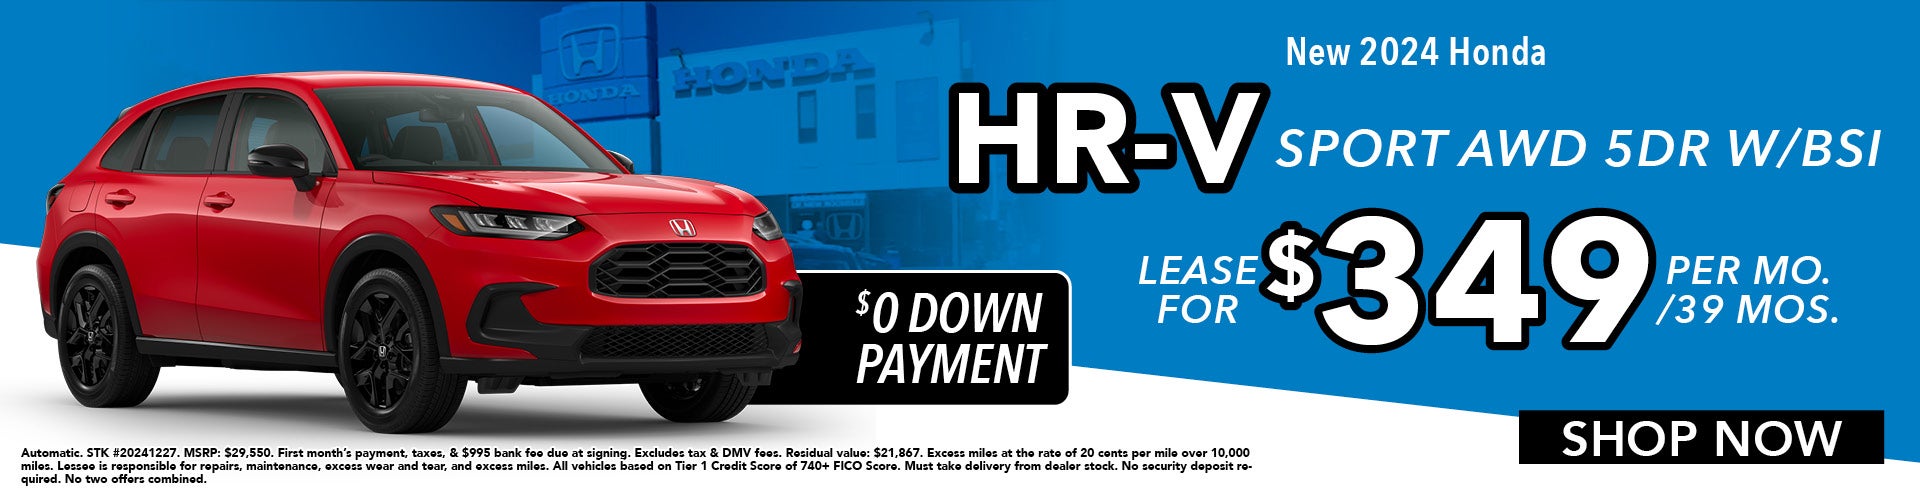 Lease a 2024 HR-V Sport at Honda of New Rochelle